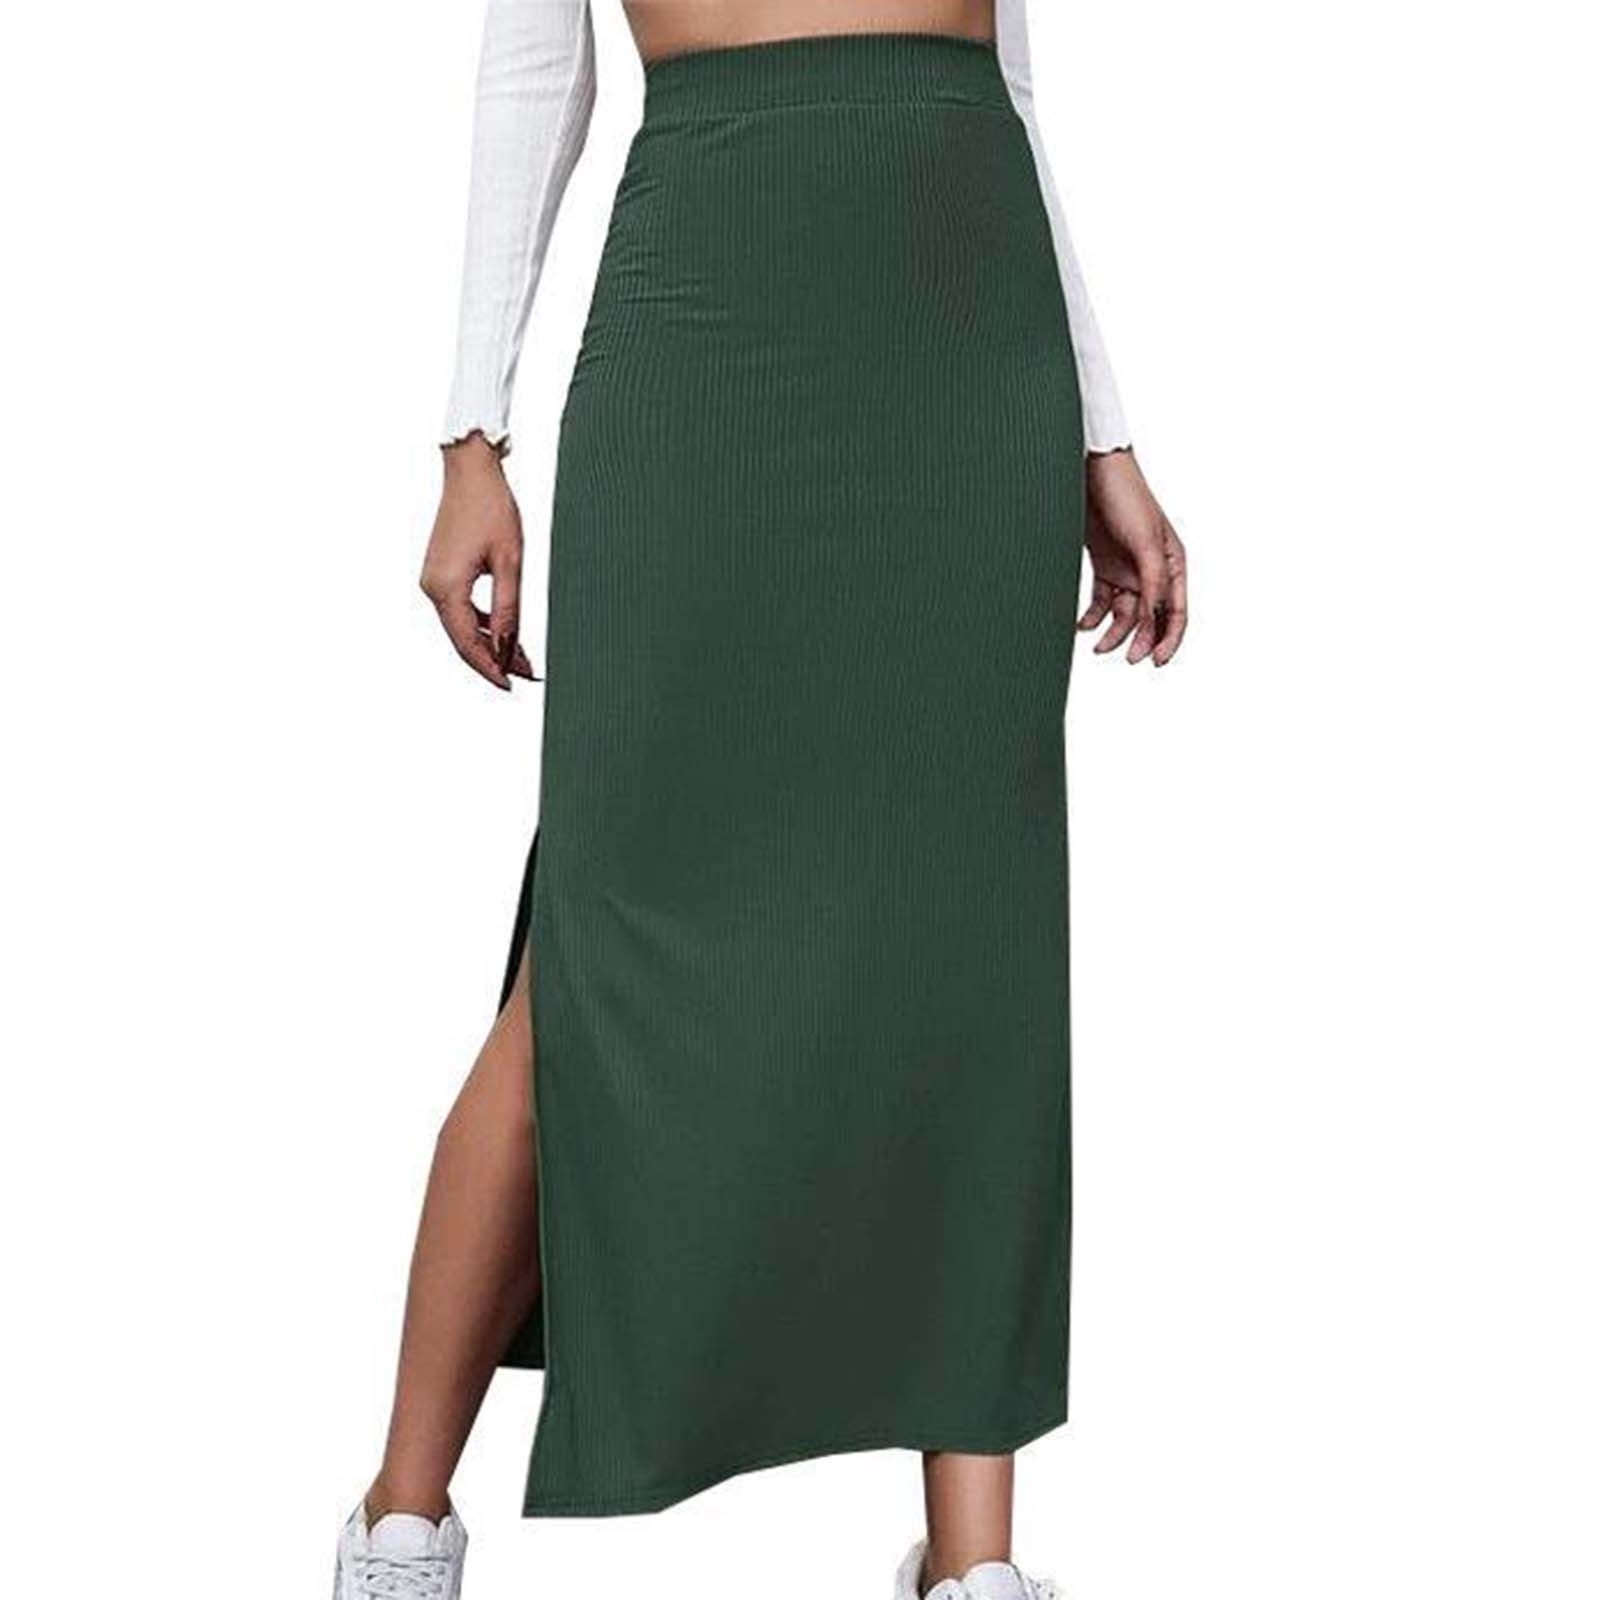 Women s High Waisted Long Skirt Elastic Solid Color Side Split Wrap Skirt Casual Slim Fit Maxi Skirts Ladies Clothes d4ca73b5 5e96 45ce 8722 64eec6ee31fb.fa2903212bc99d86b4759486d4d2df19